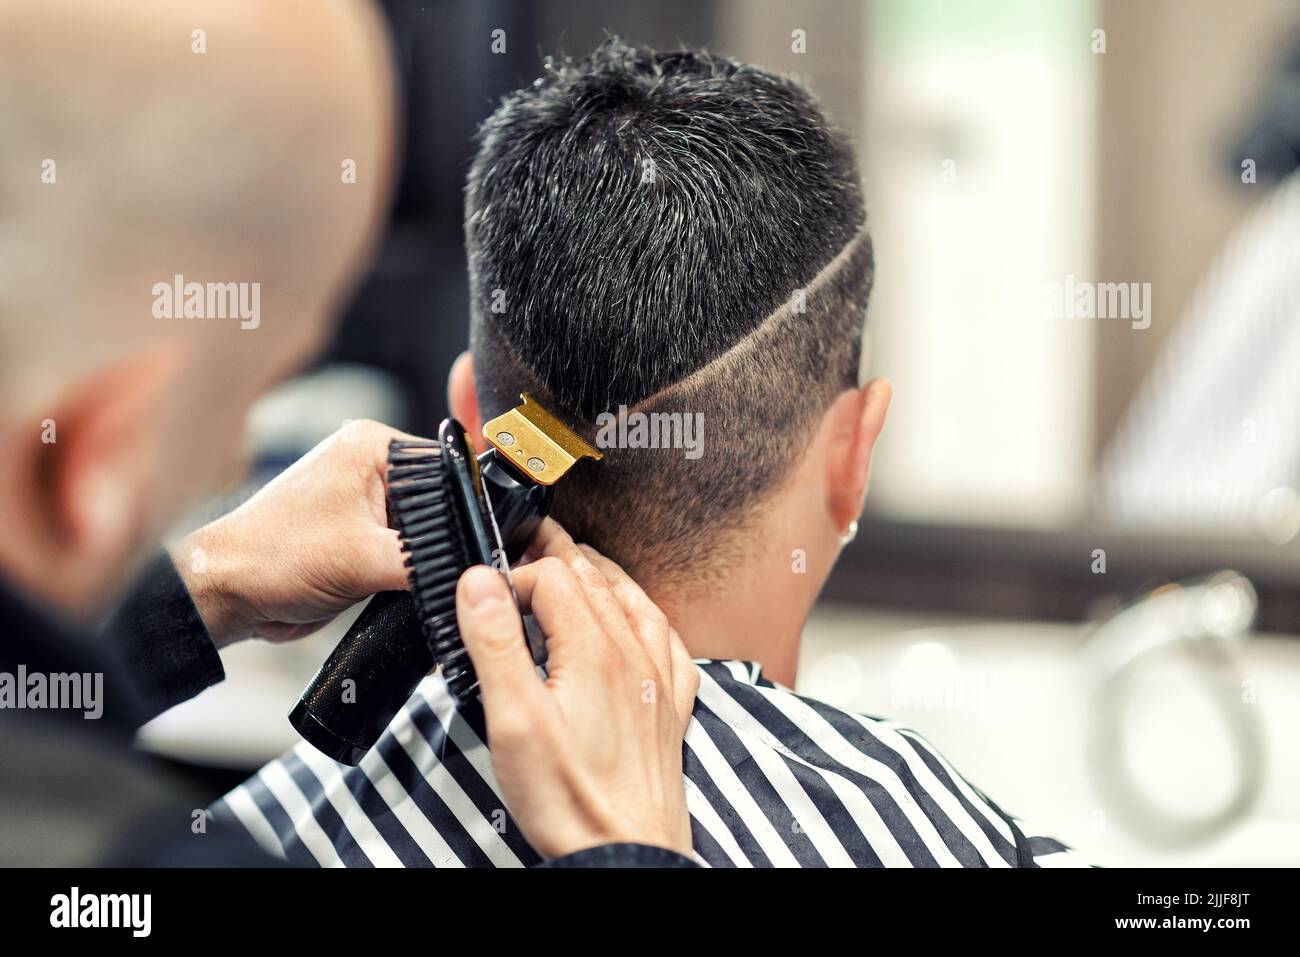 Unrecognizable male barber using trimmer and brush to shave ornament on head of man during work in barbershop Stock Photo